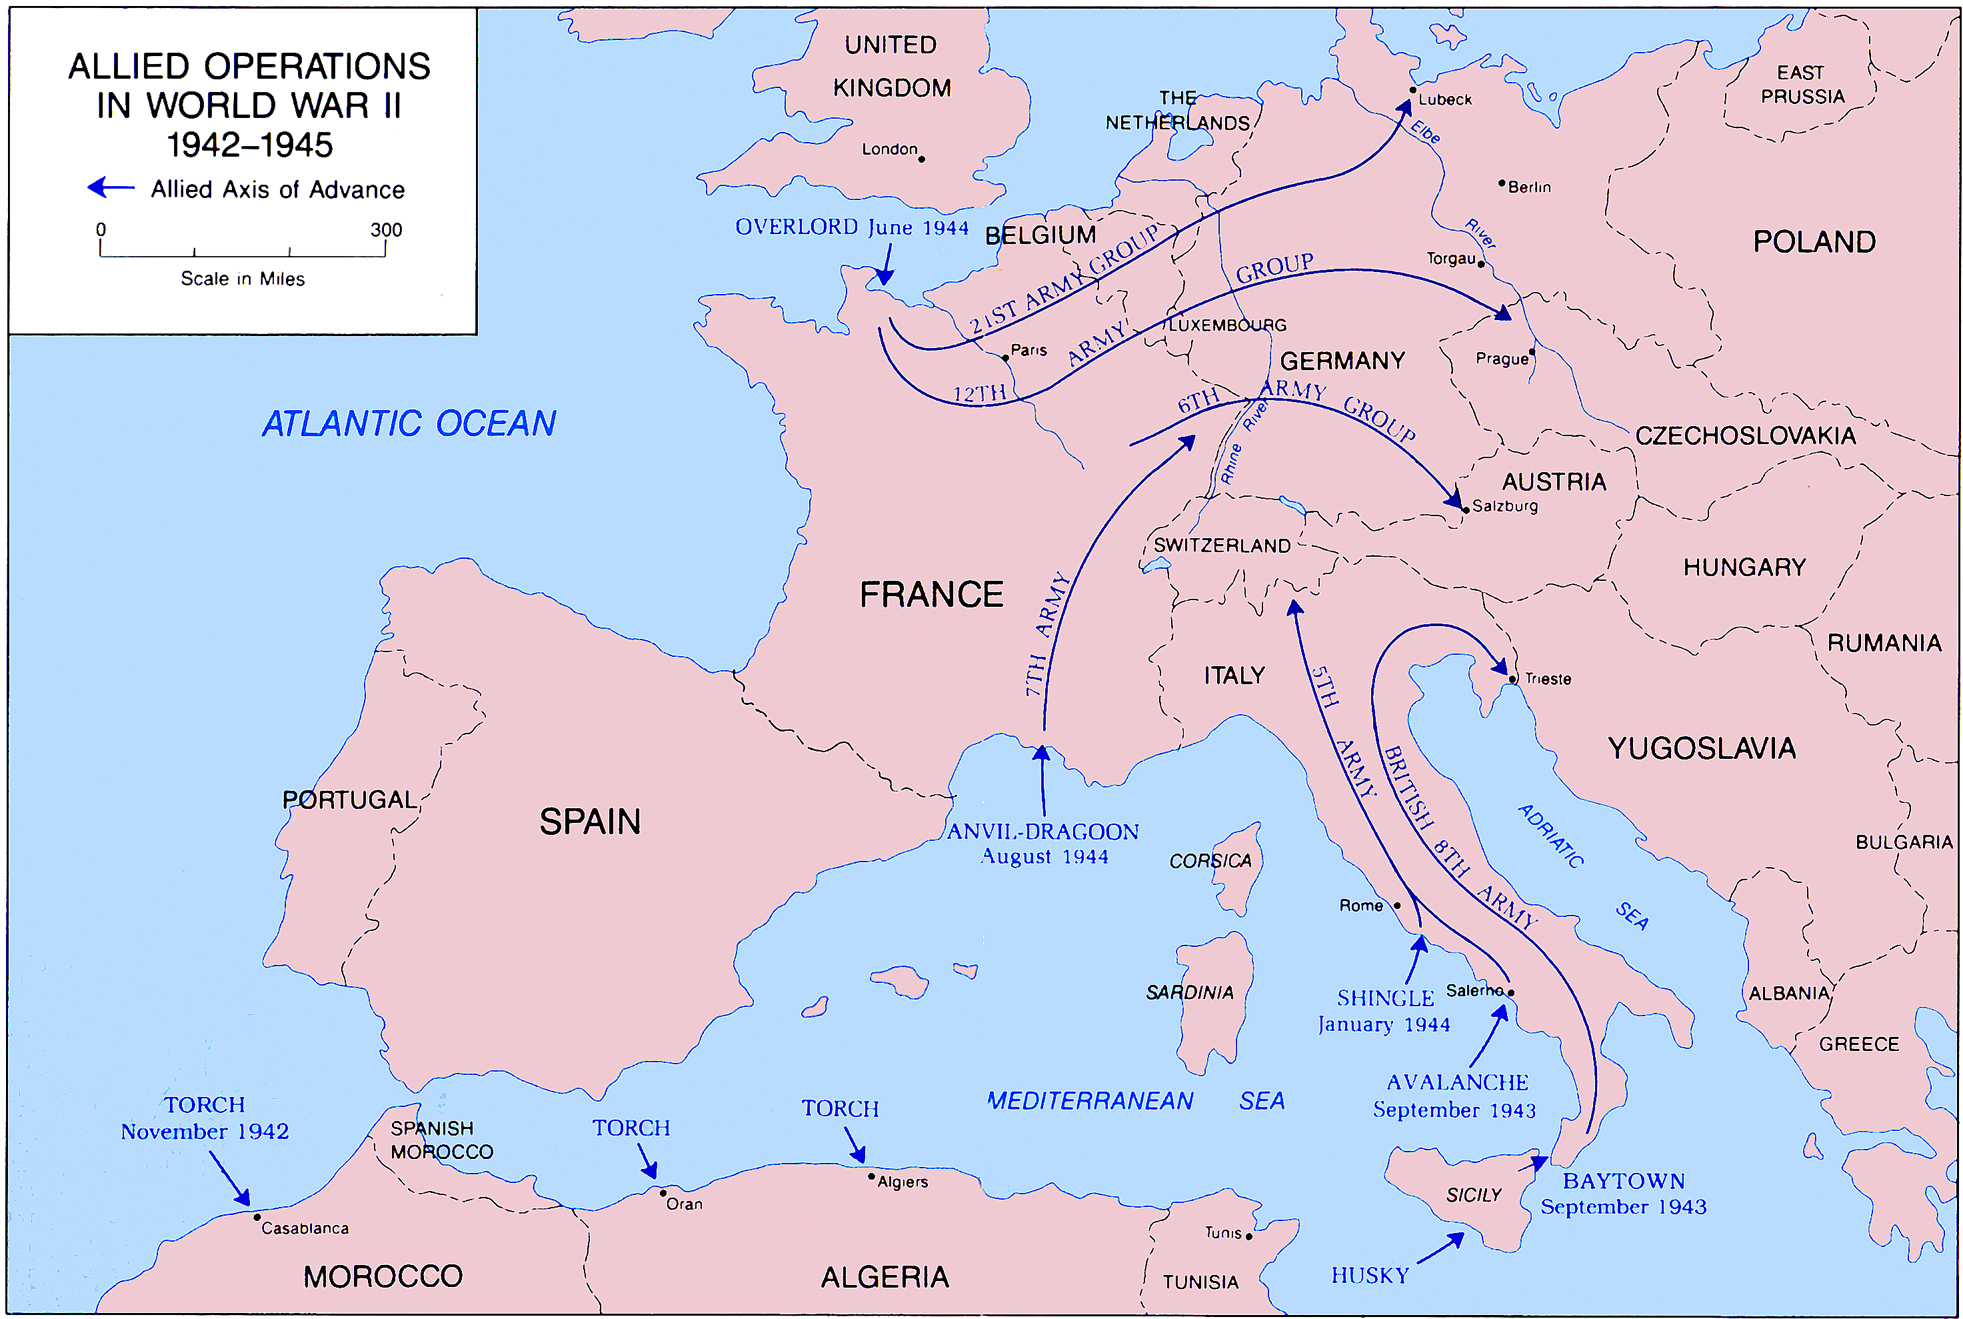 Map of World War II: Allied Operations in Europe and North Africa 1942-1945